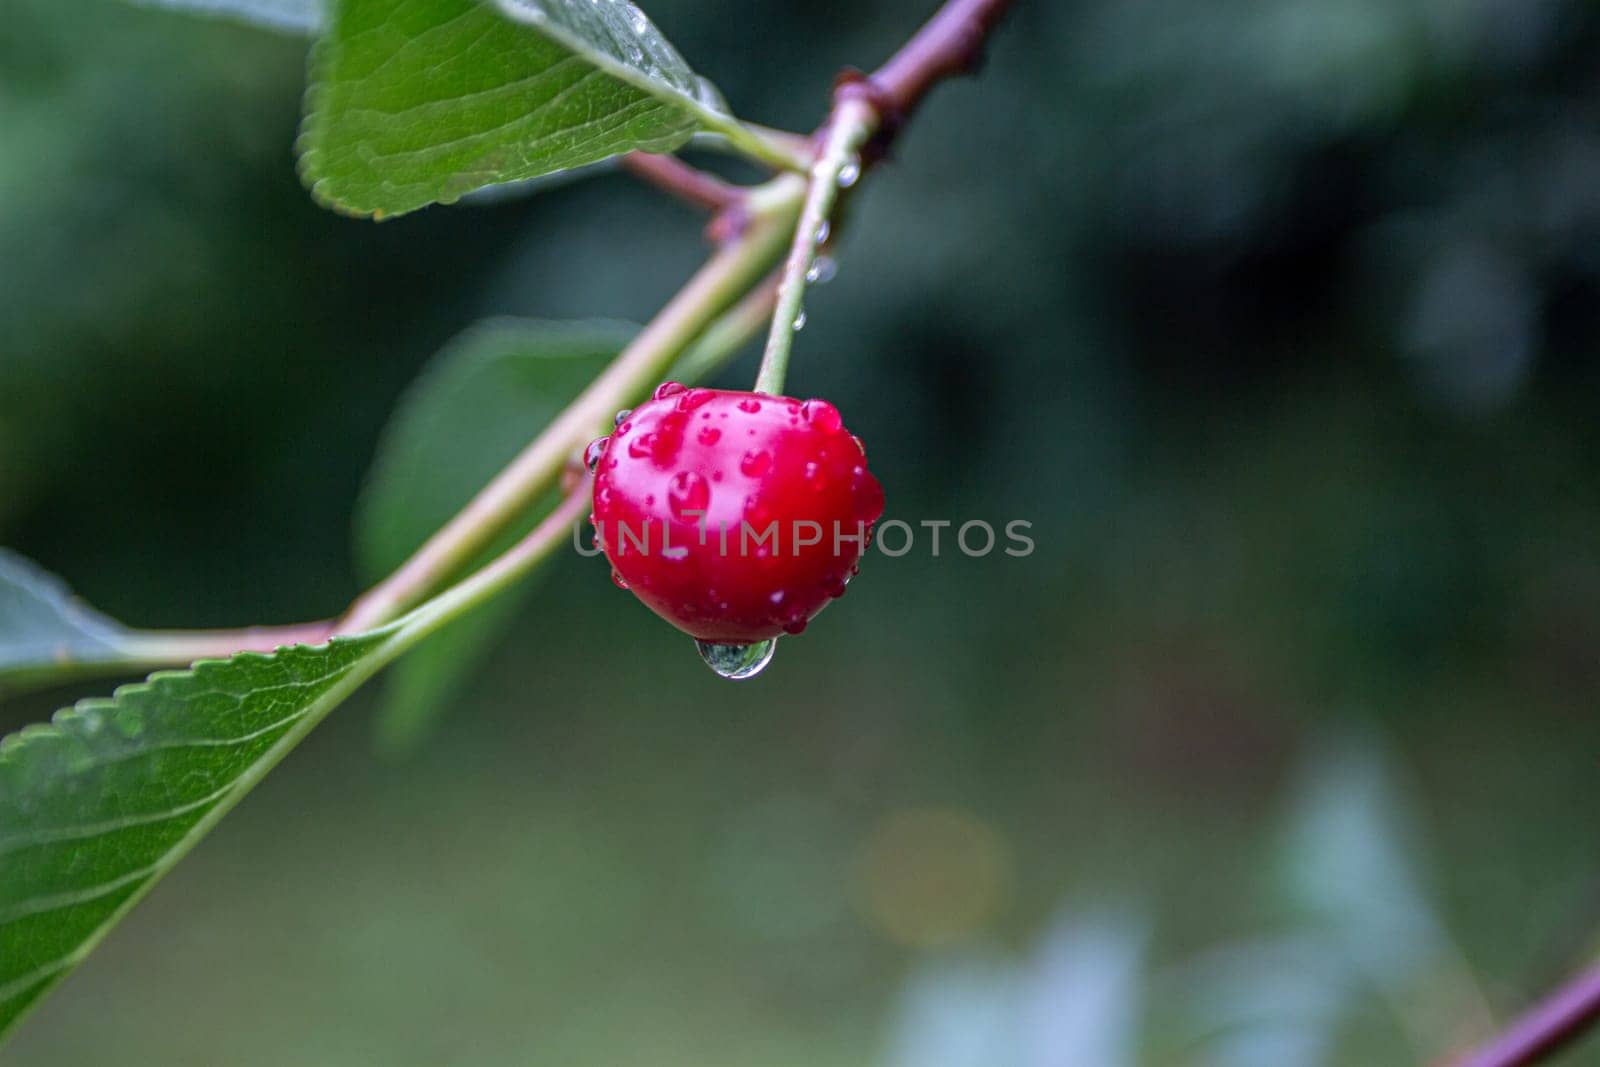 A red cherry berry on a branch with water droplets. Harvest in the garden. Natural agriculture. Ripe fruits.